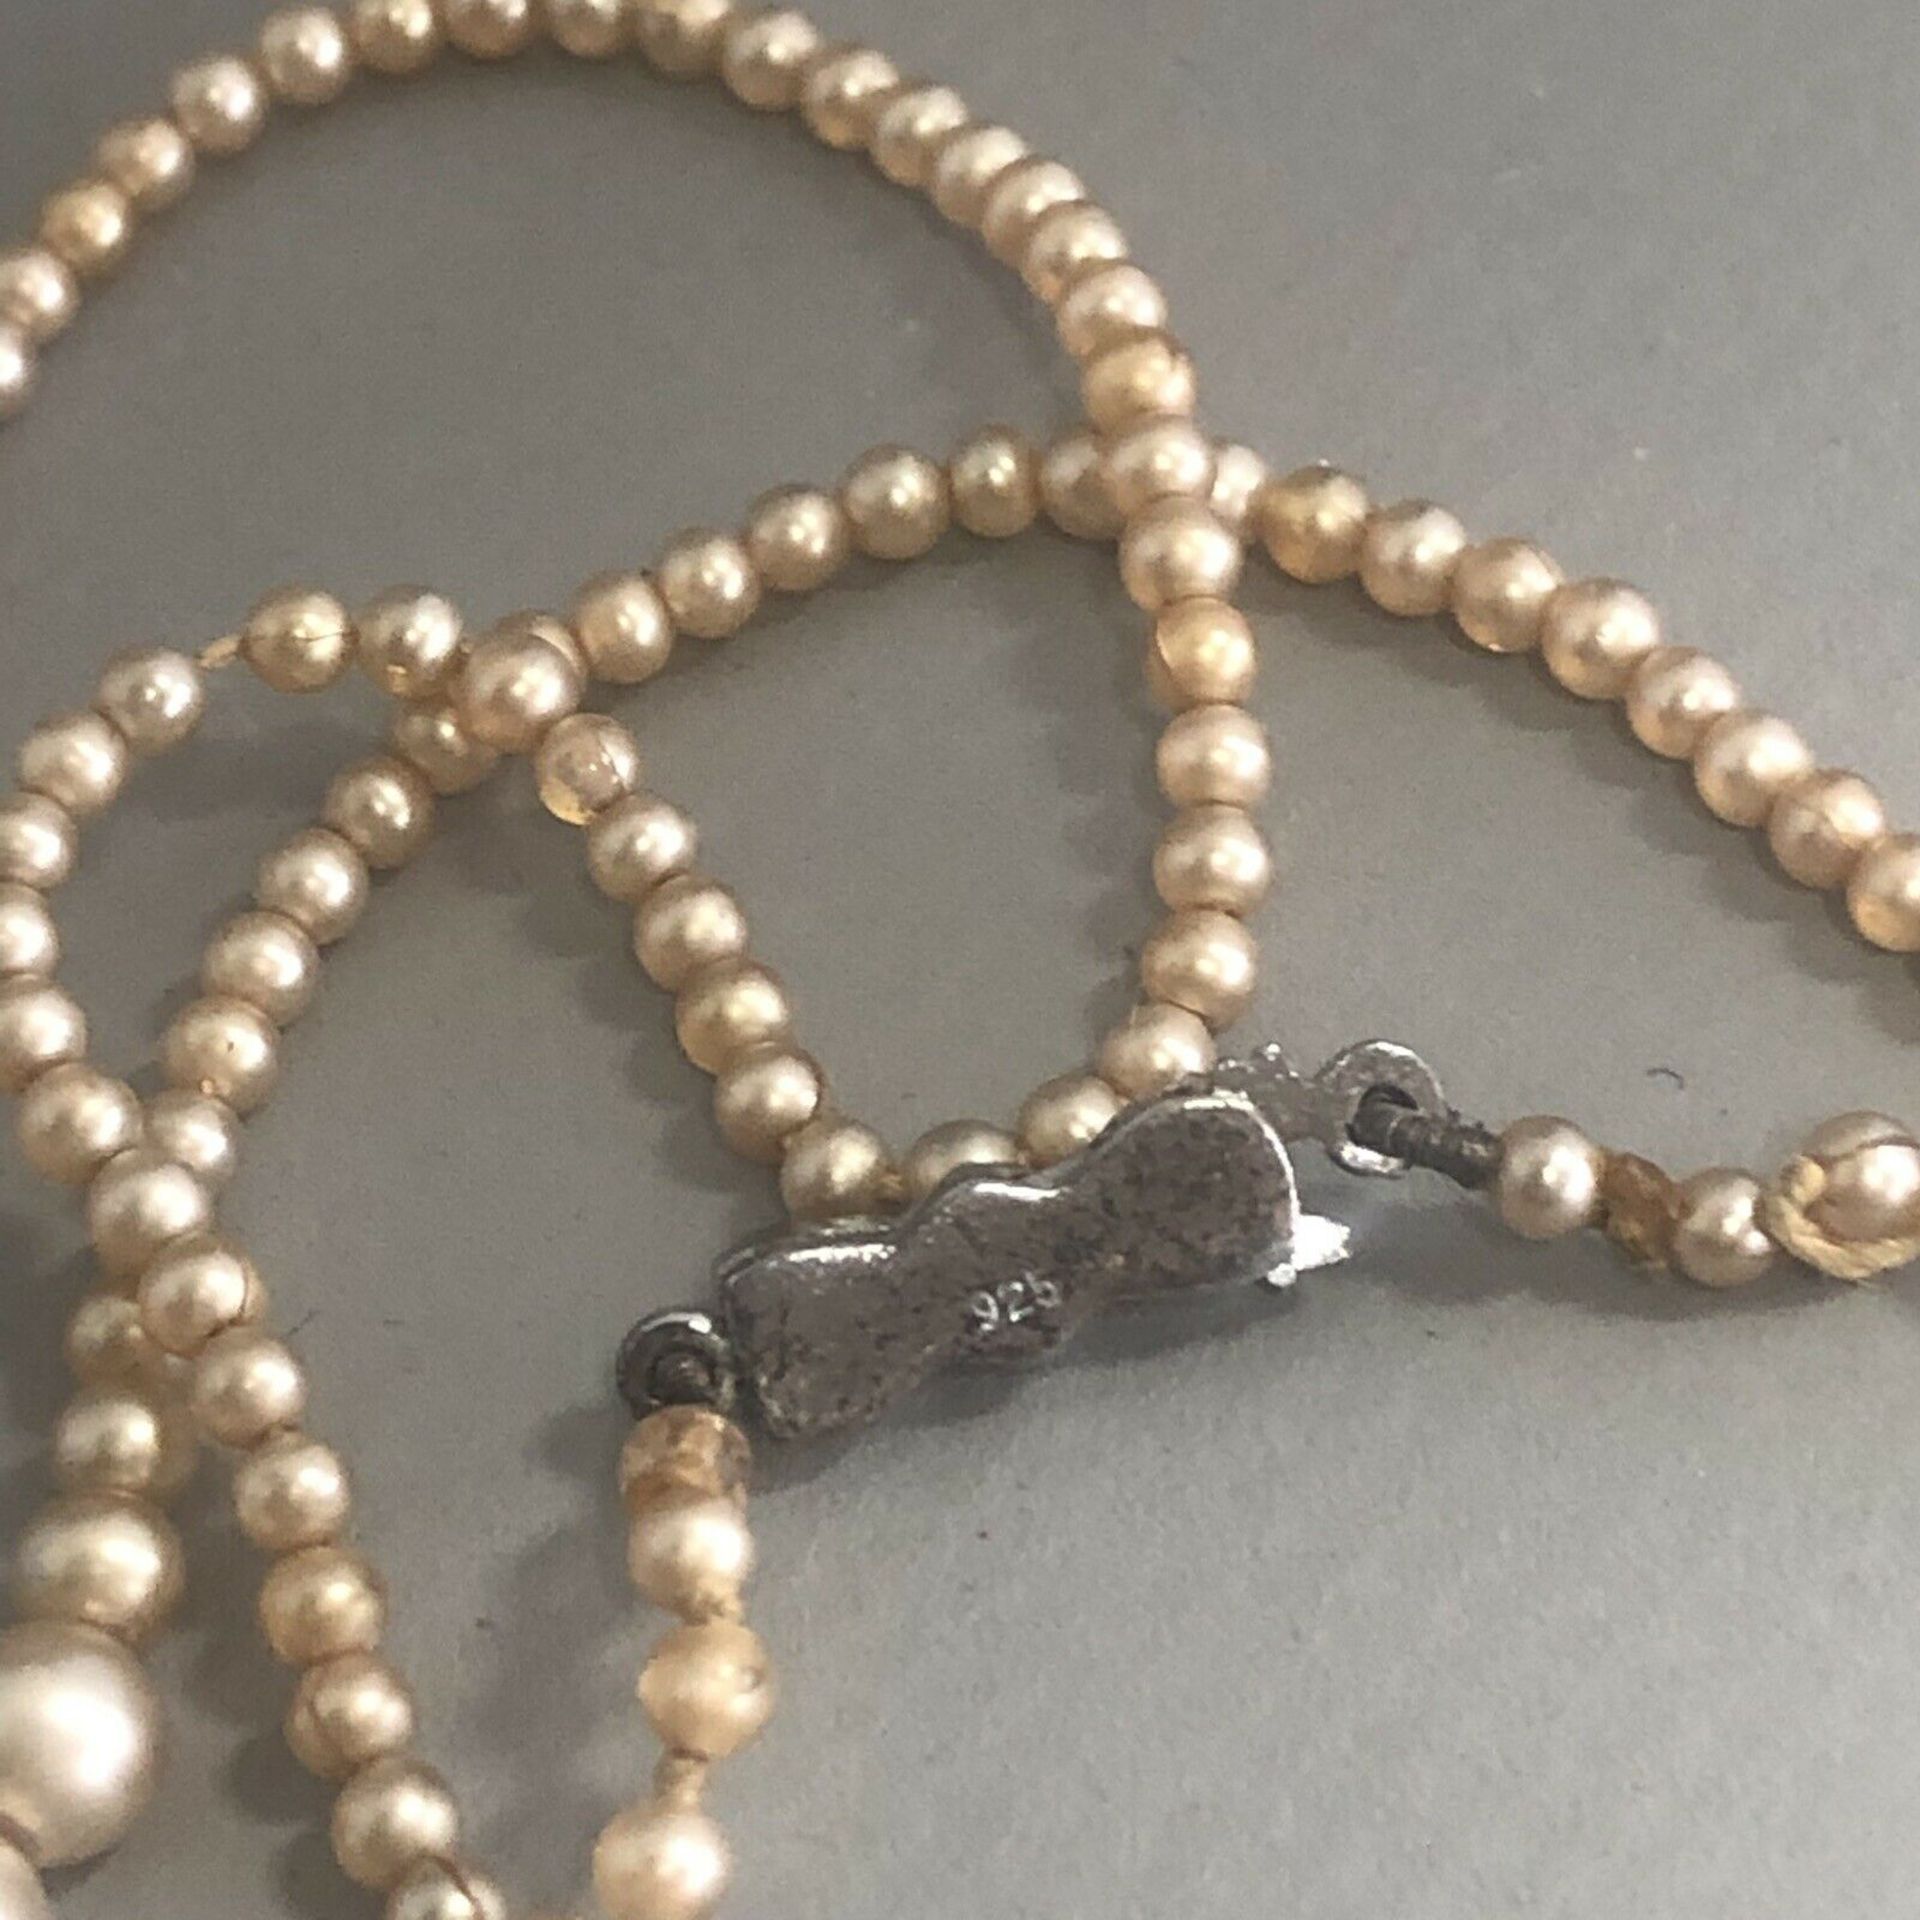 An antique delicate dainty faux pearl necklace graduated pearls - silver clasp - Image 4 of 6